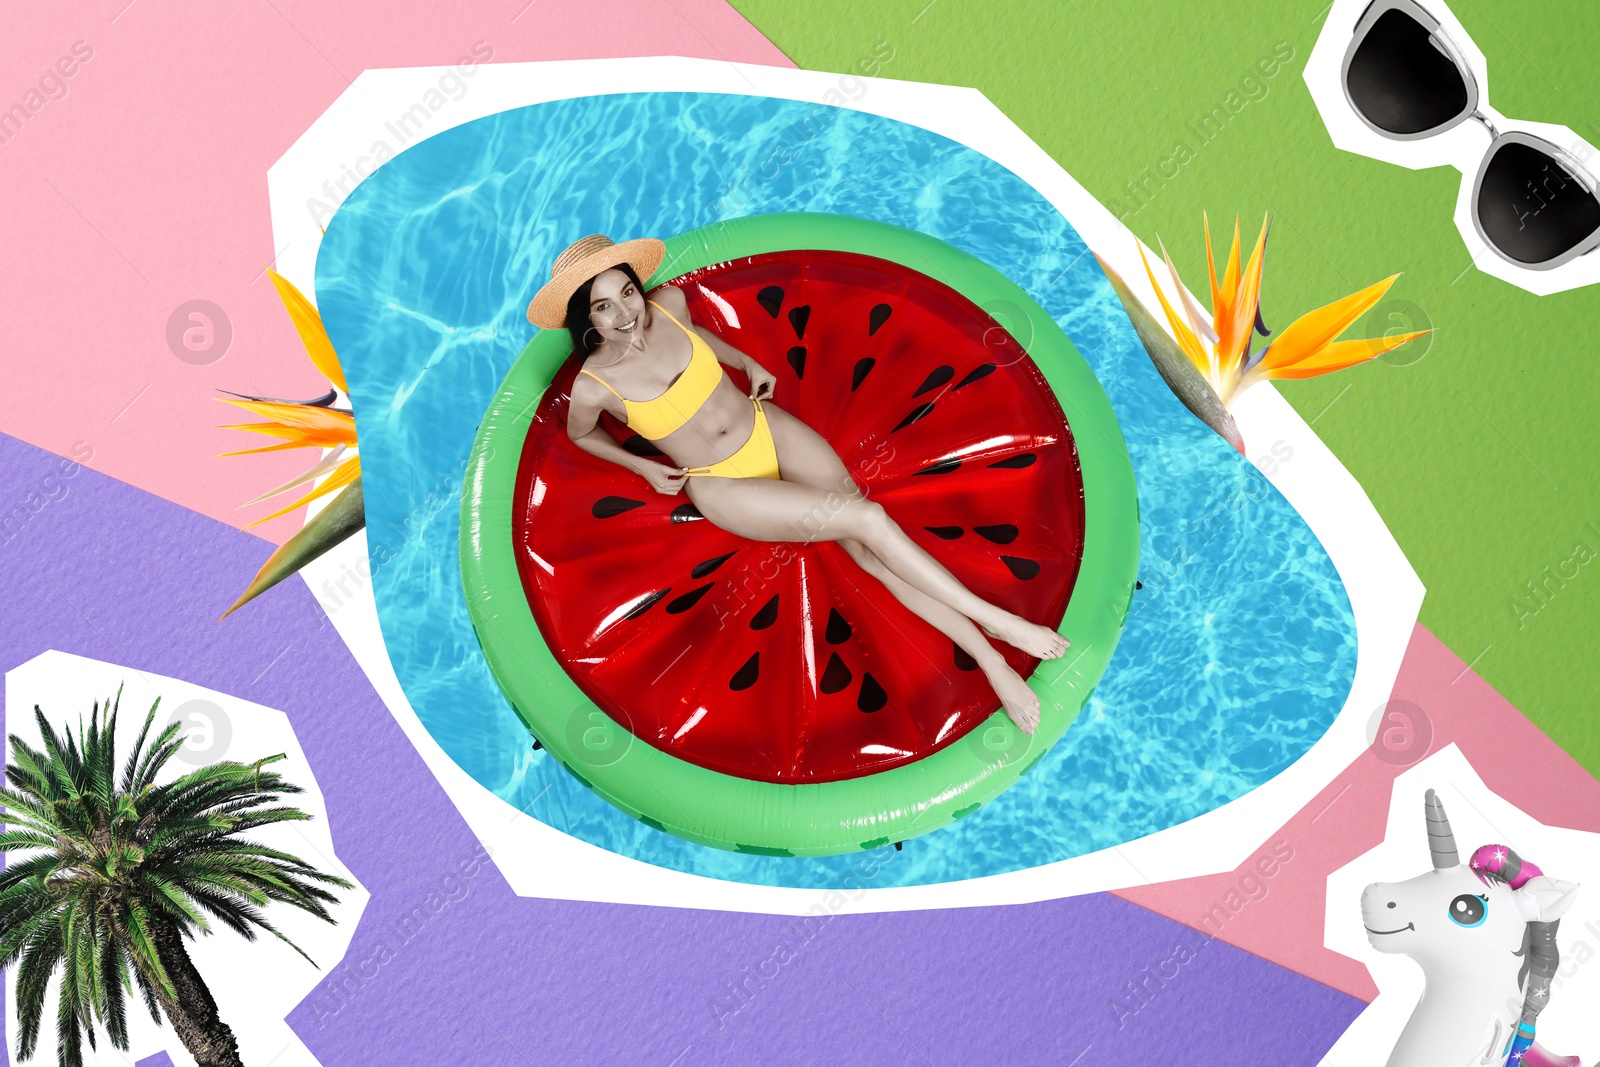 Image of Creative collage with beautiful woman in bikini on watermelon inflatable mattress against color background, top view